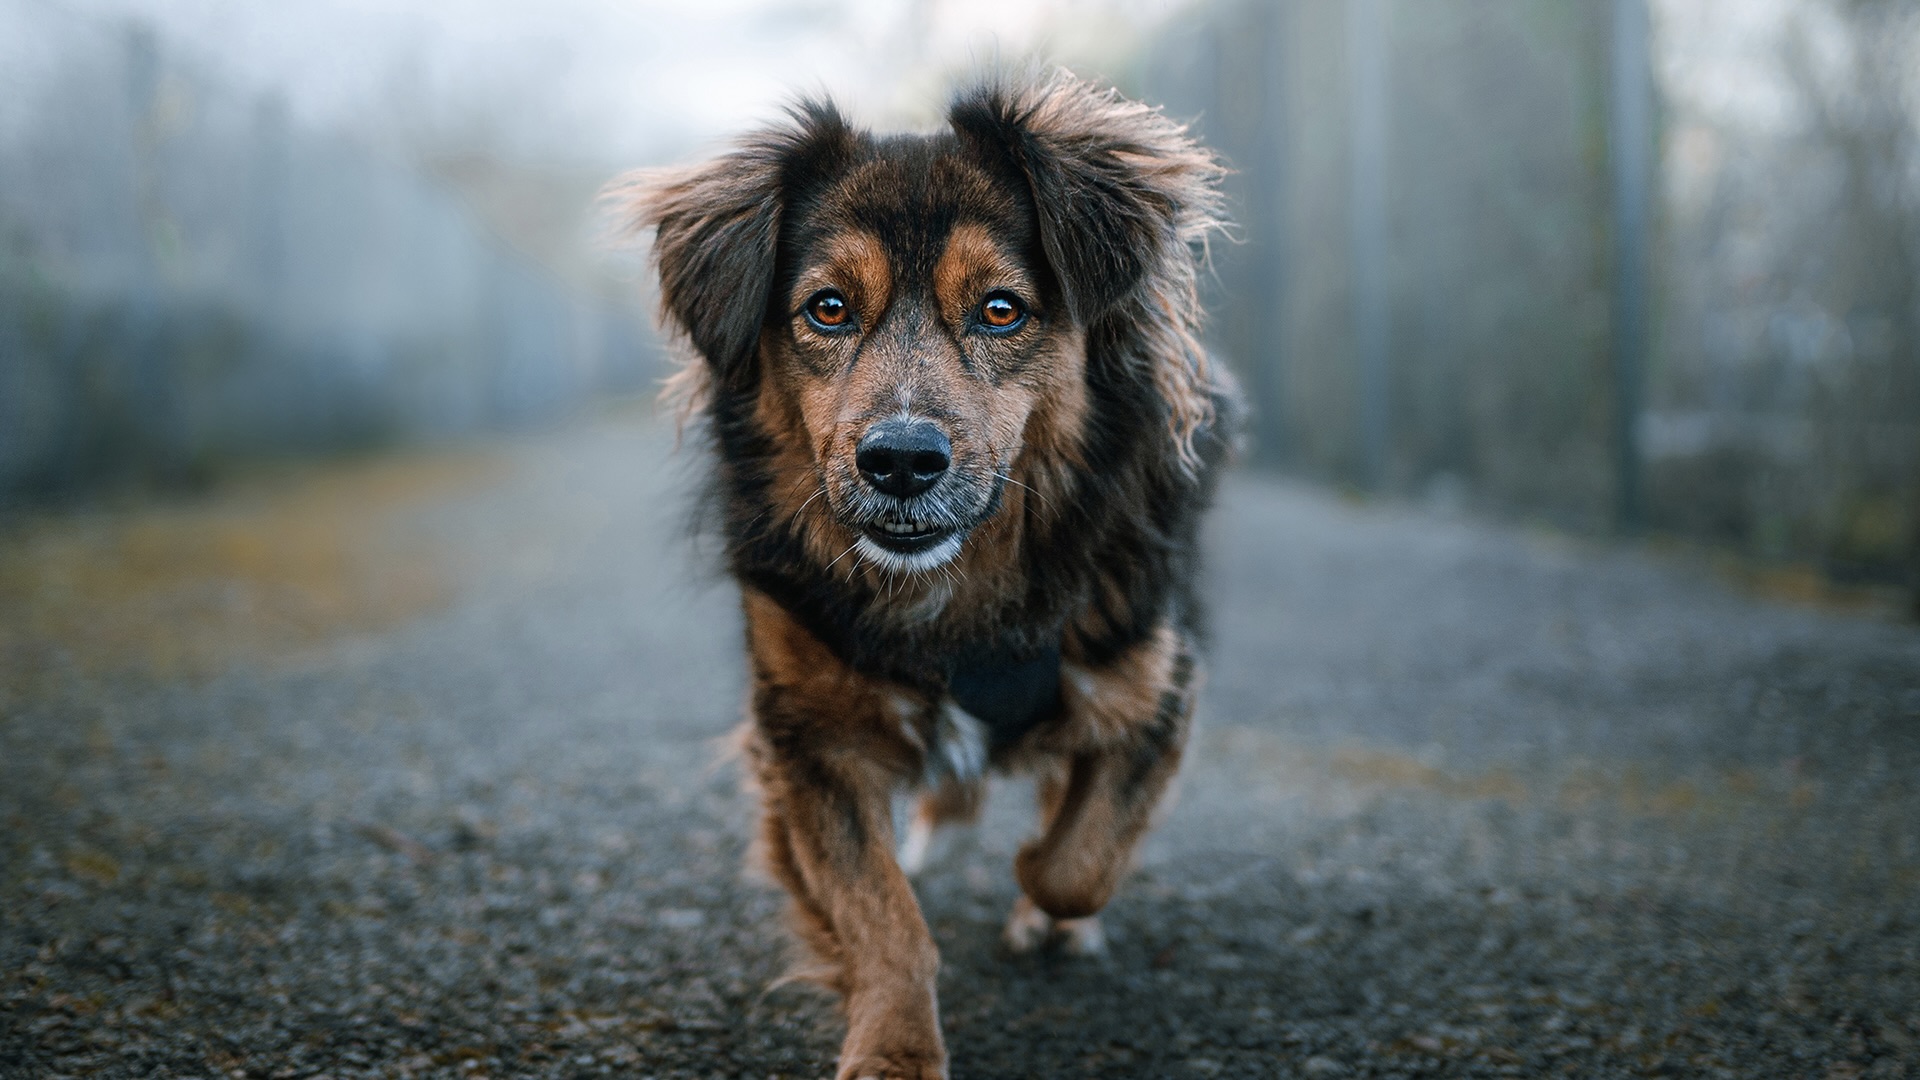 Pet photography: Fail-proof strategies to capture our furry friends